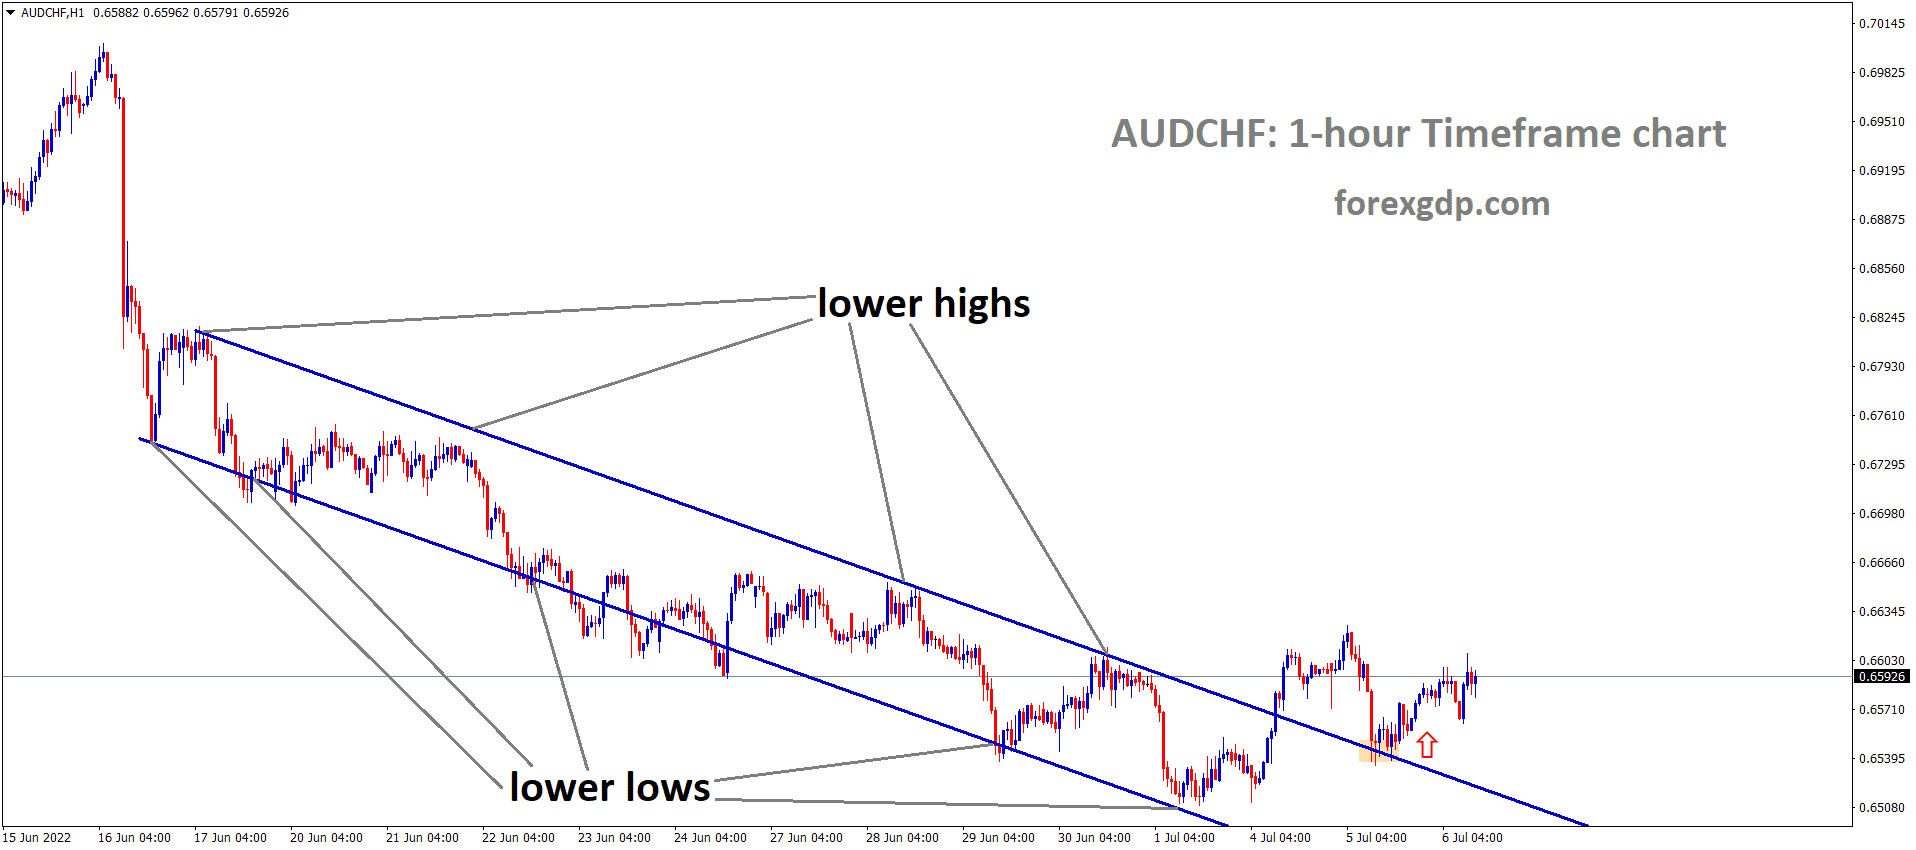 AUDCHF has broken the Descending channel and the Market has retested and Rebounded from the broken area.